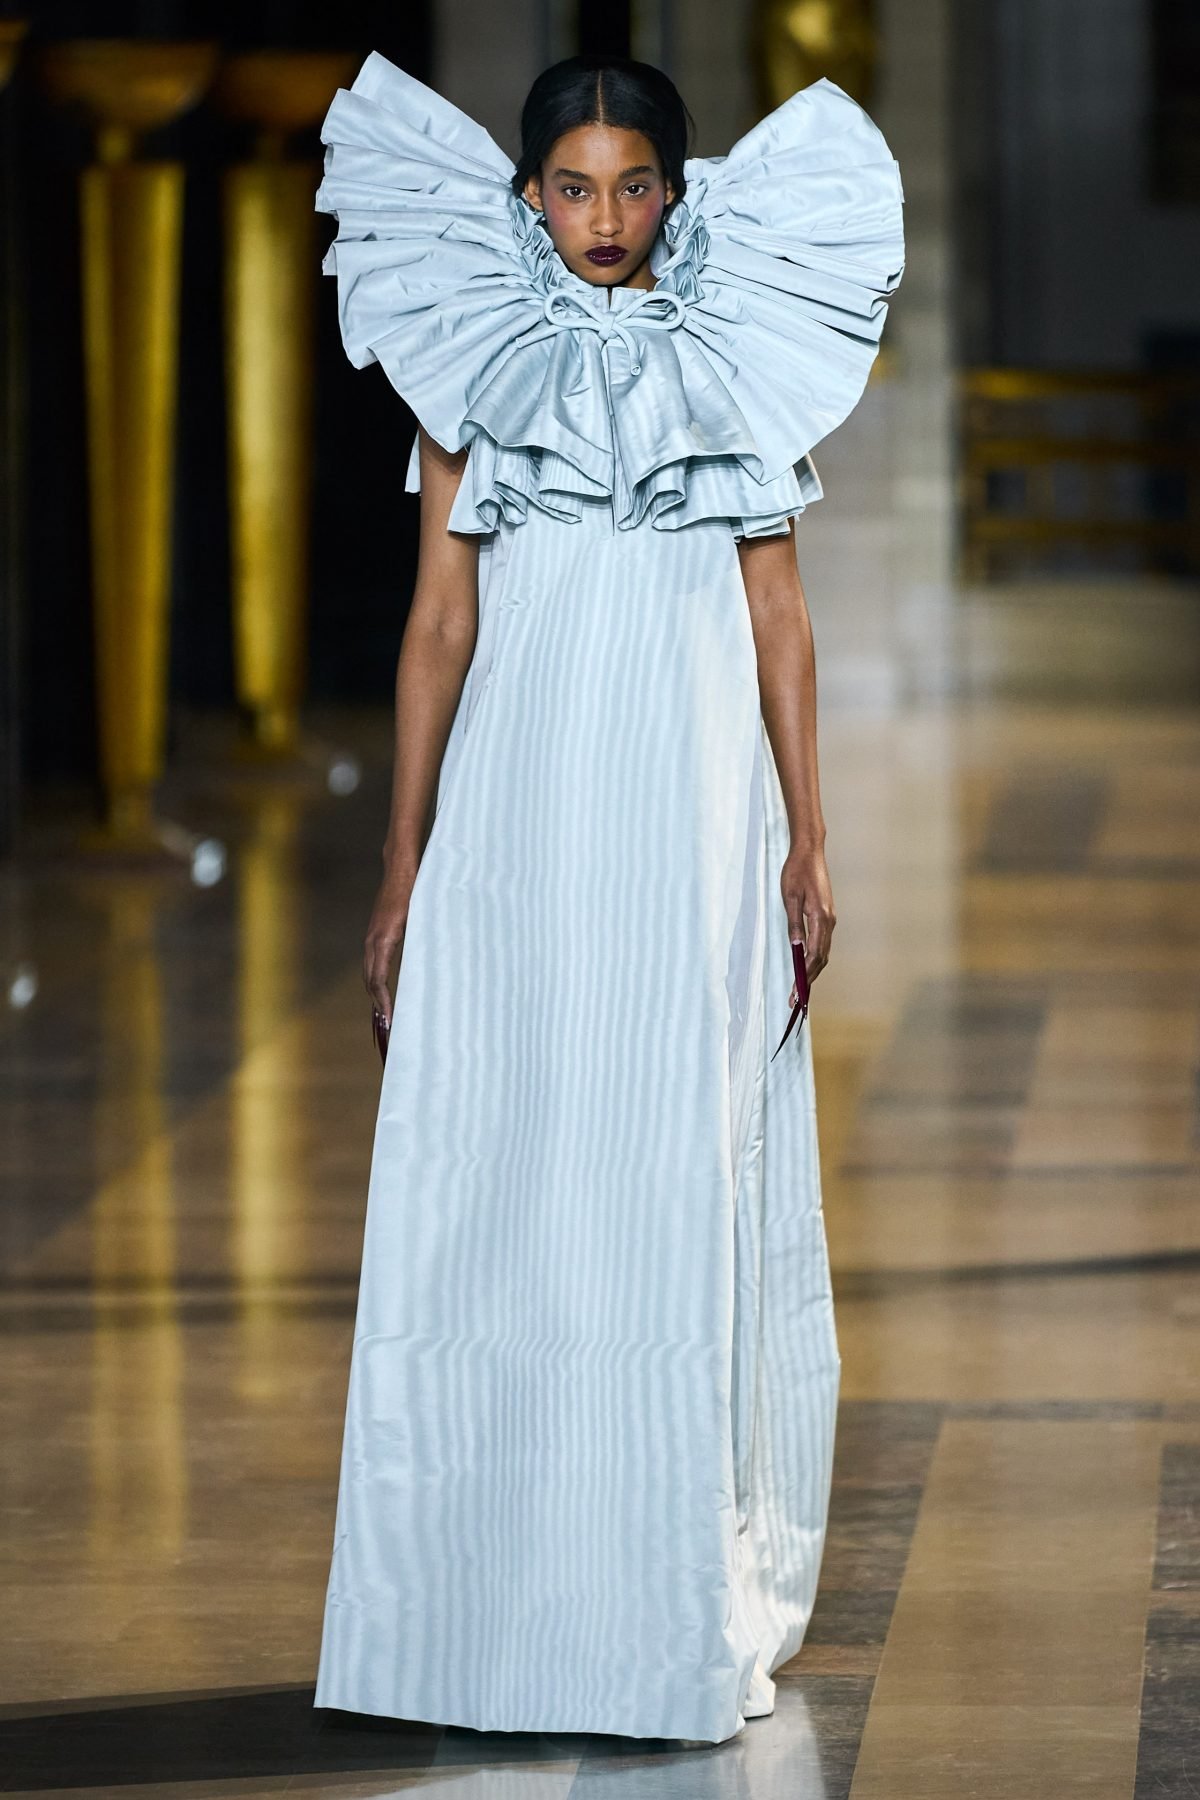 00015-Viktor-and-Rolf-Spring-22-Couture-credit-Alessandro-Lucioni-Gorunway-1-1200x1800.jpeg